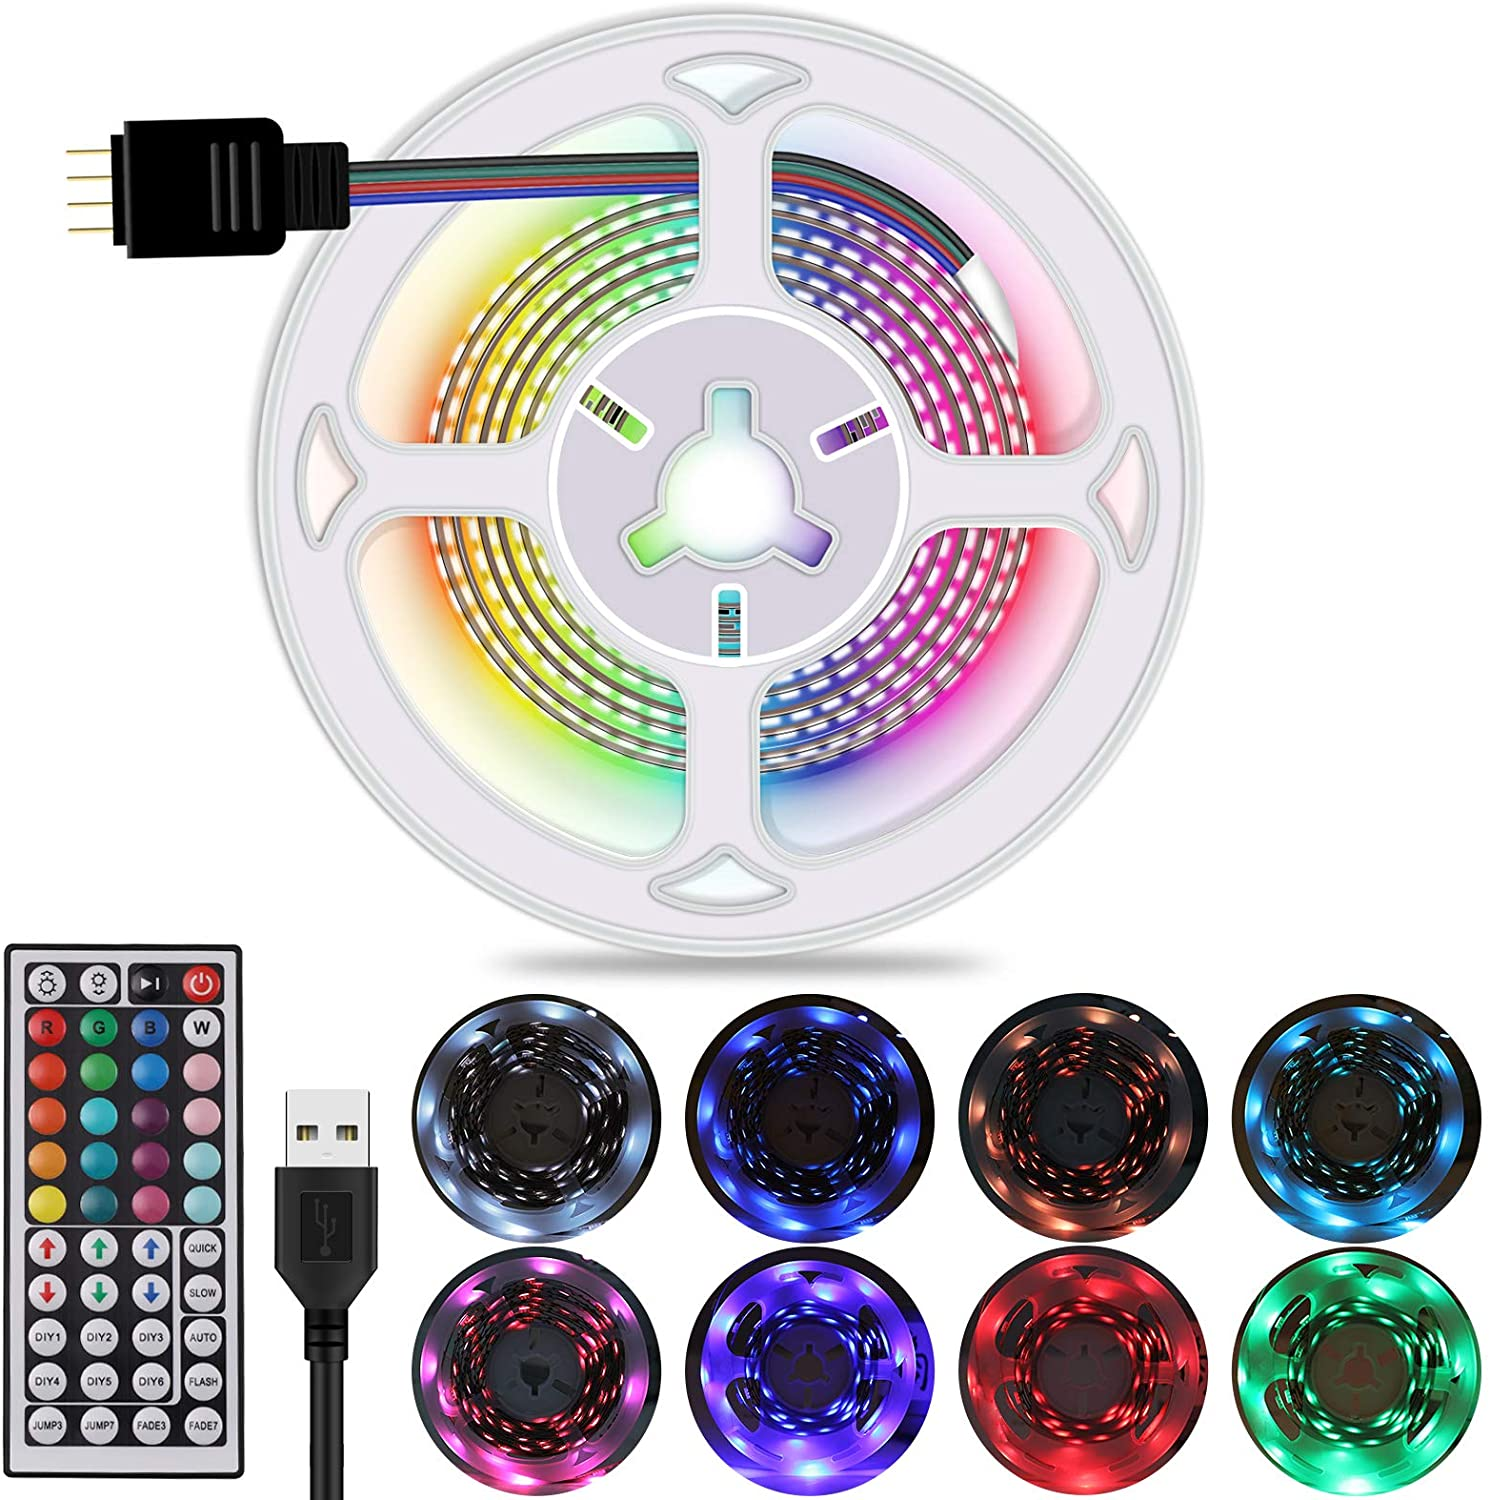 LED Strip Light for TV, 5050 RGB 16 Colors Changing Light Strip with Remote